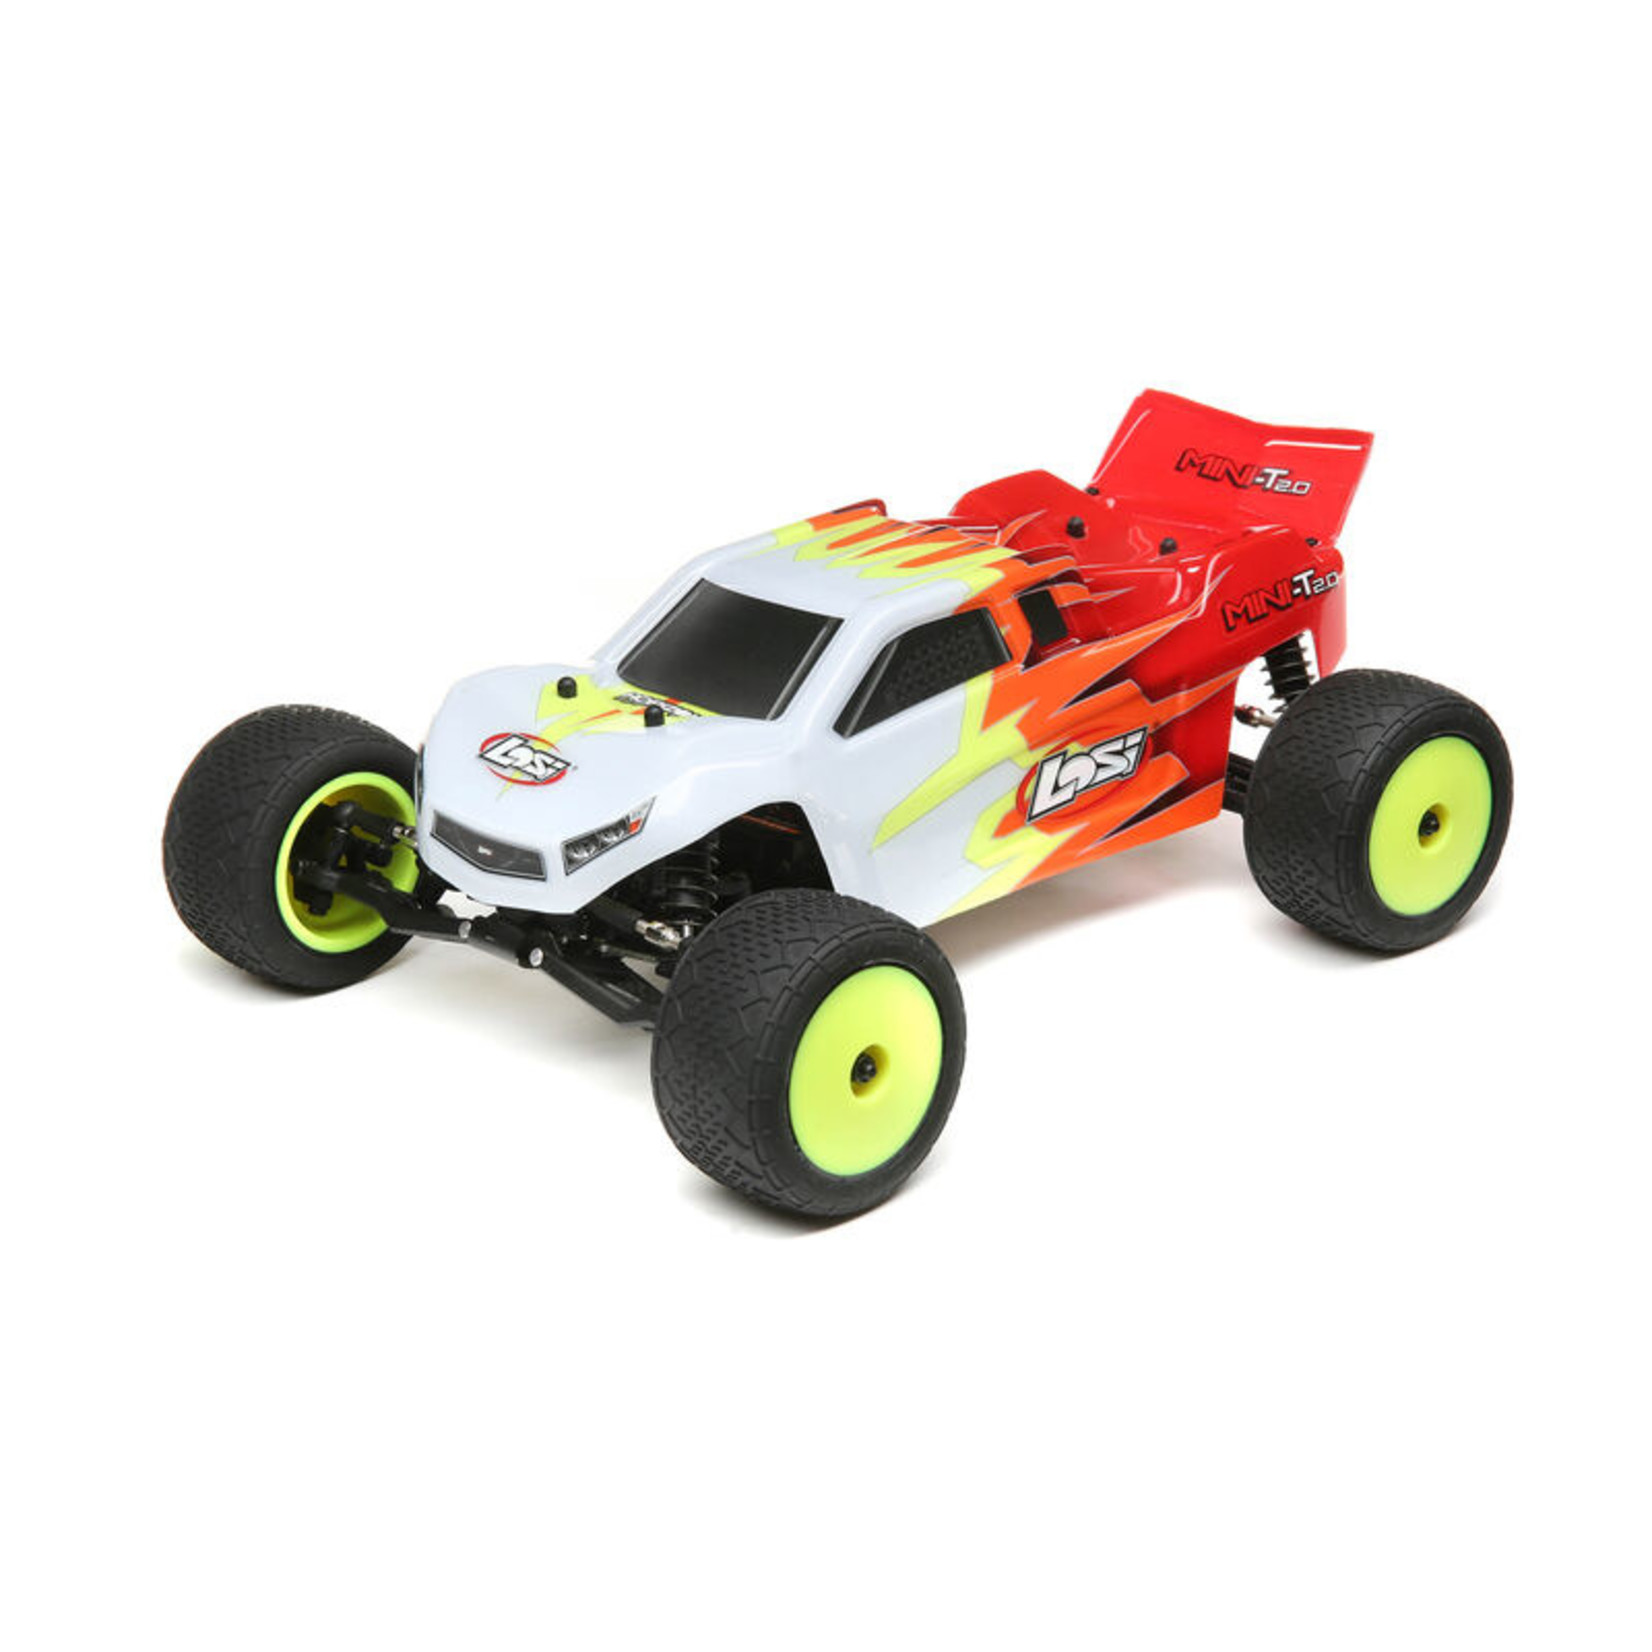 LOSI LOS01015T1  1/18 Mini-T 2.0 2WD Stadium Truck Brushed RTR, Red/White